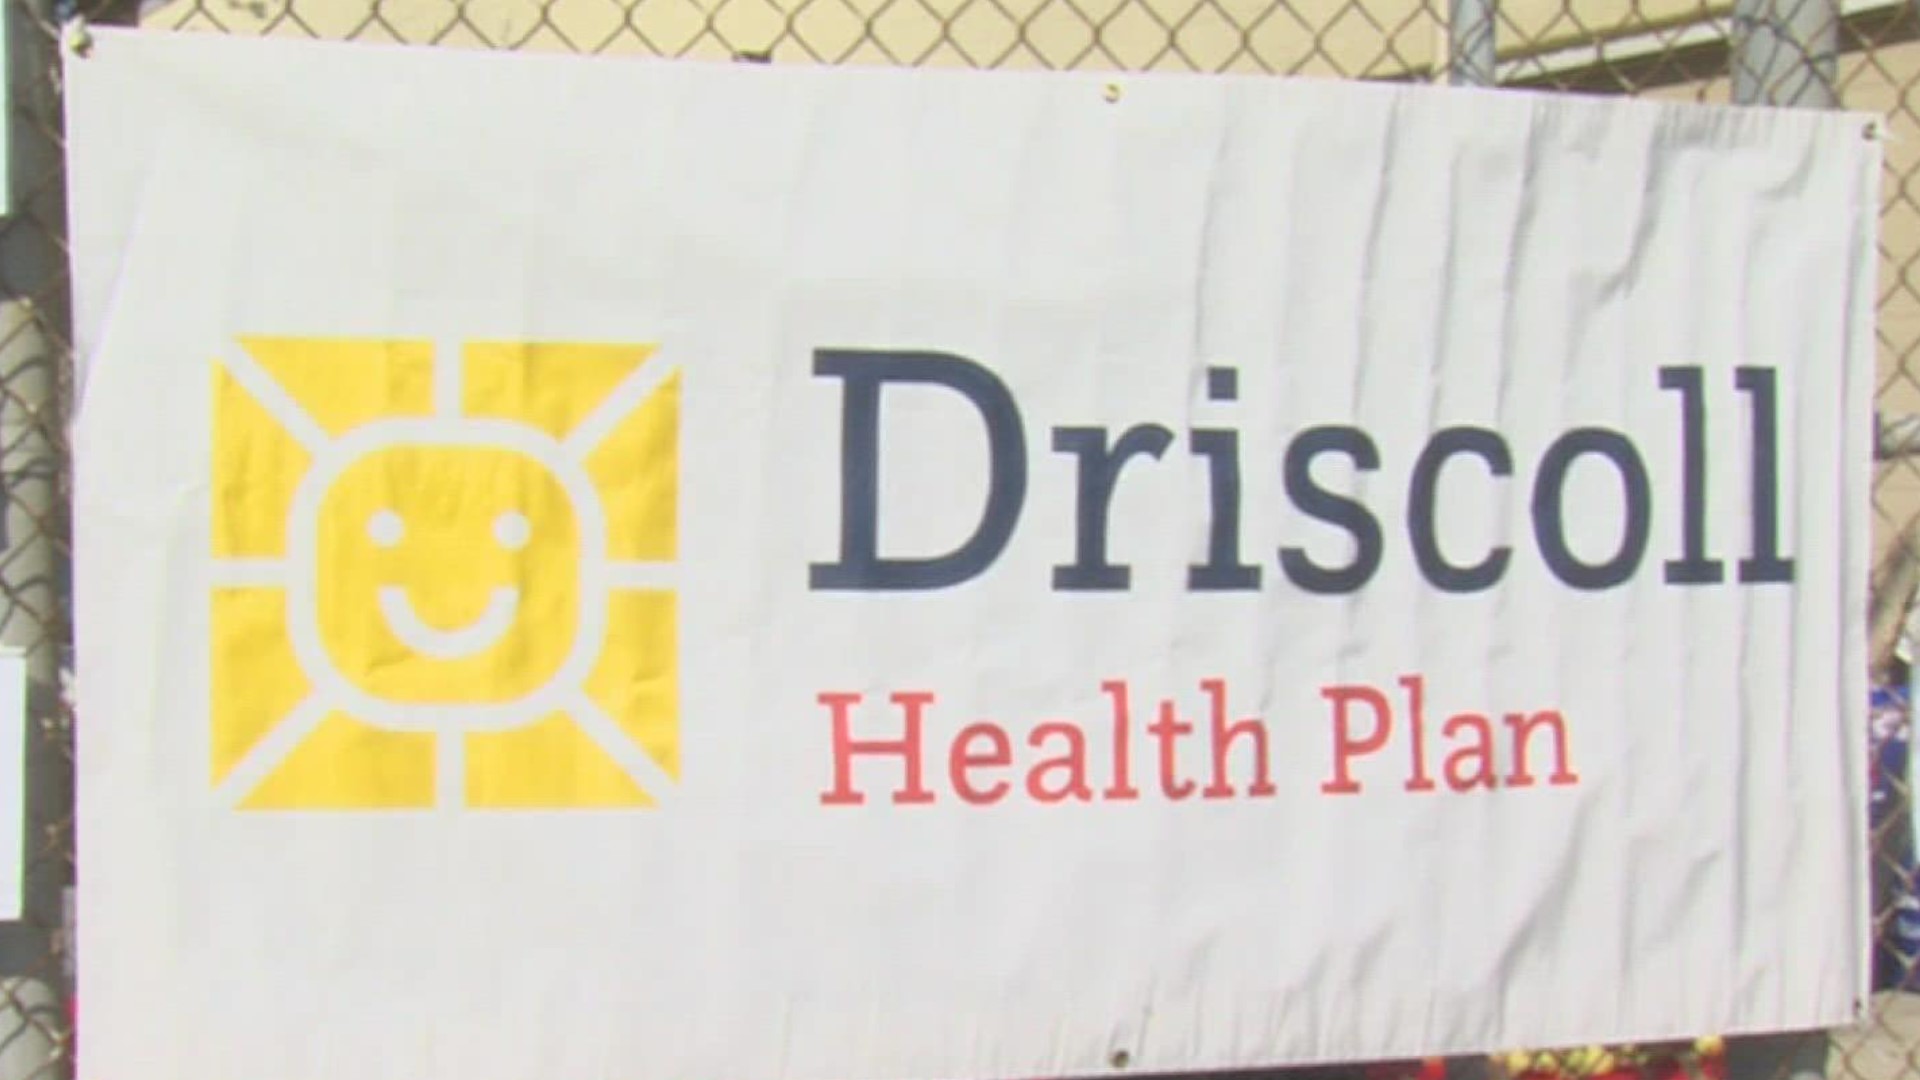 Events like these are held to remind the community that Driscoll Health Plan is there for those in need always.